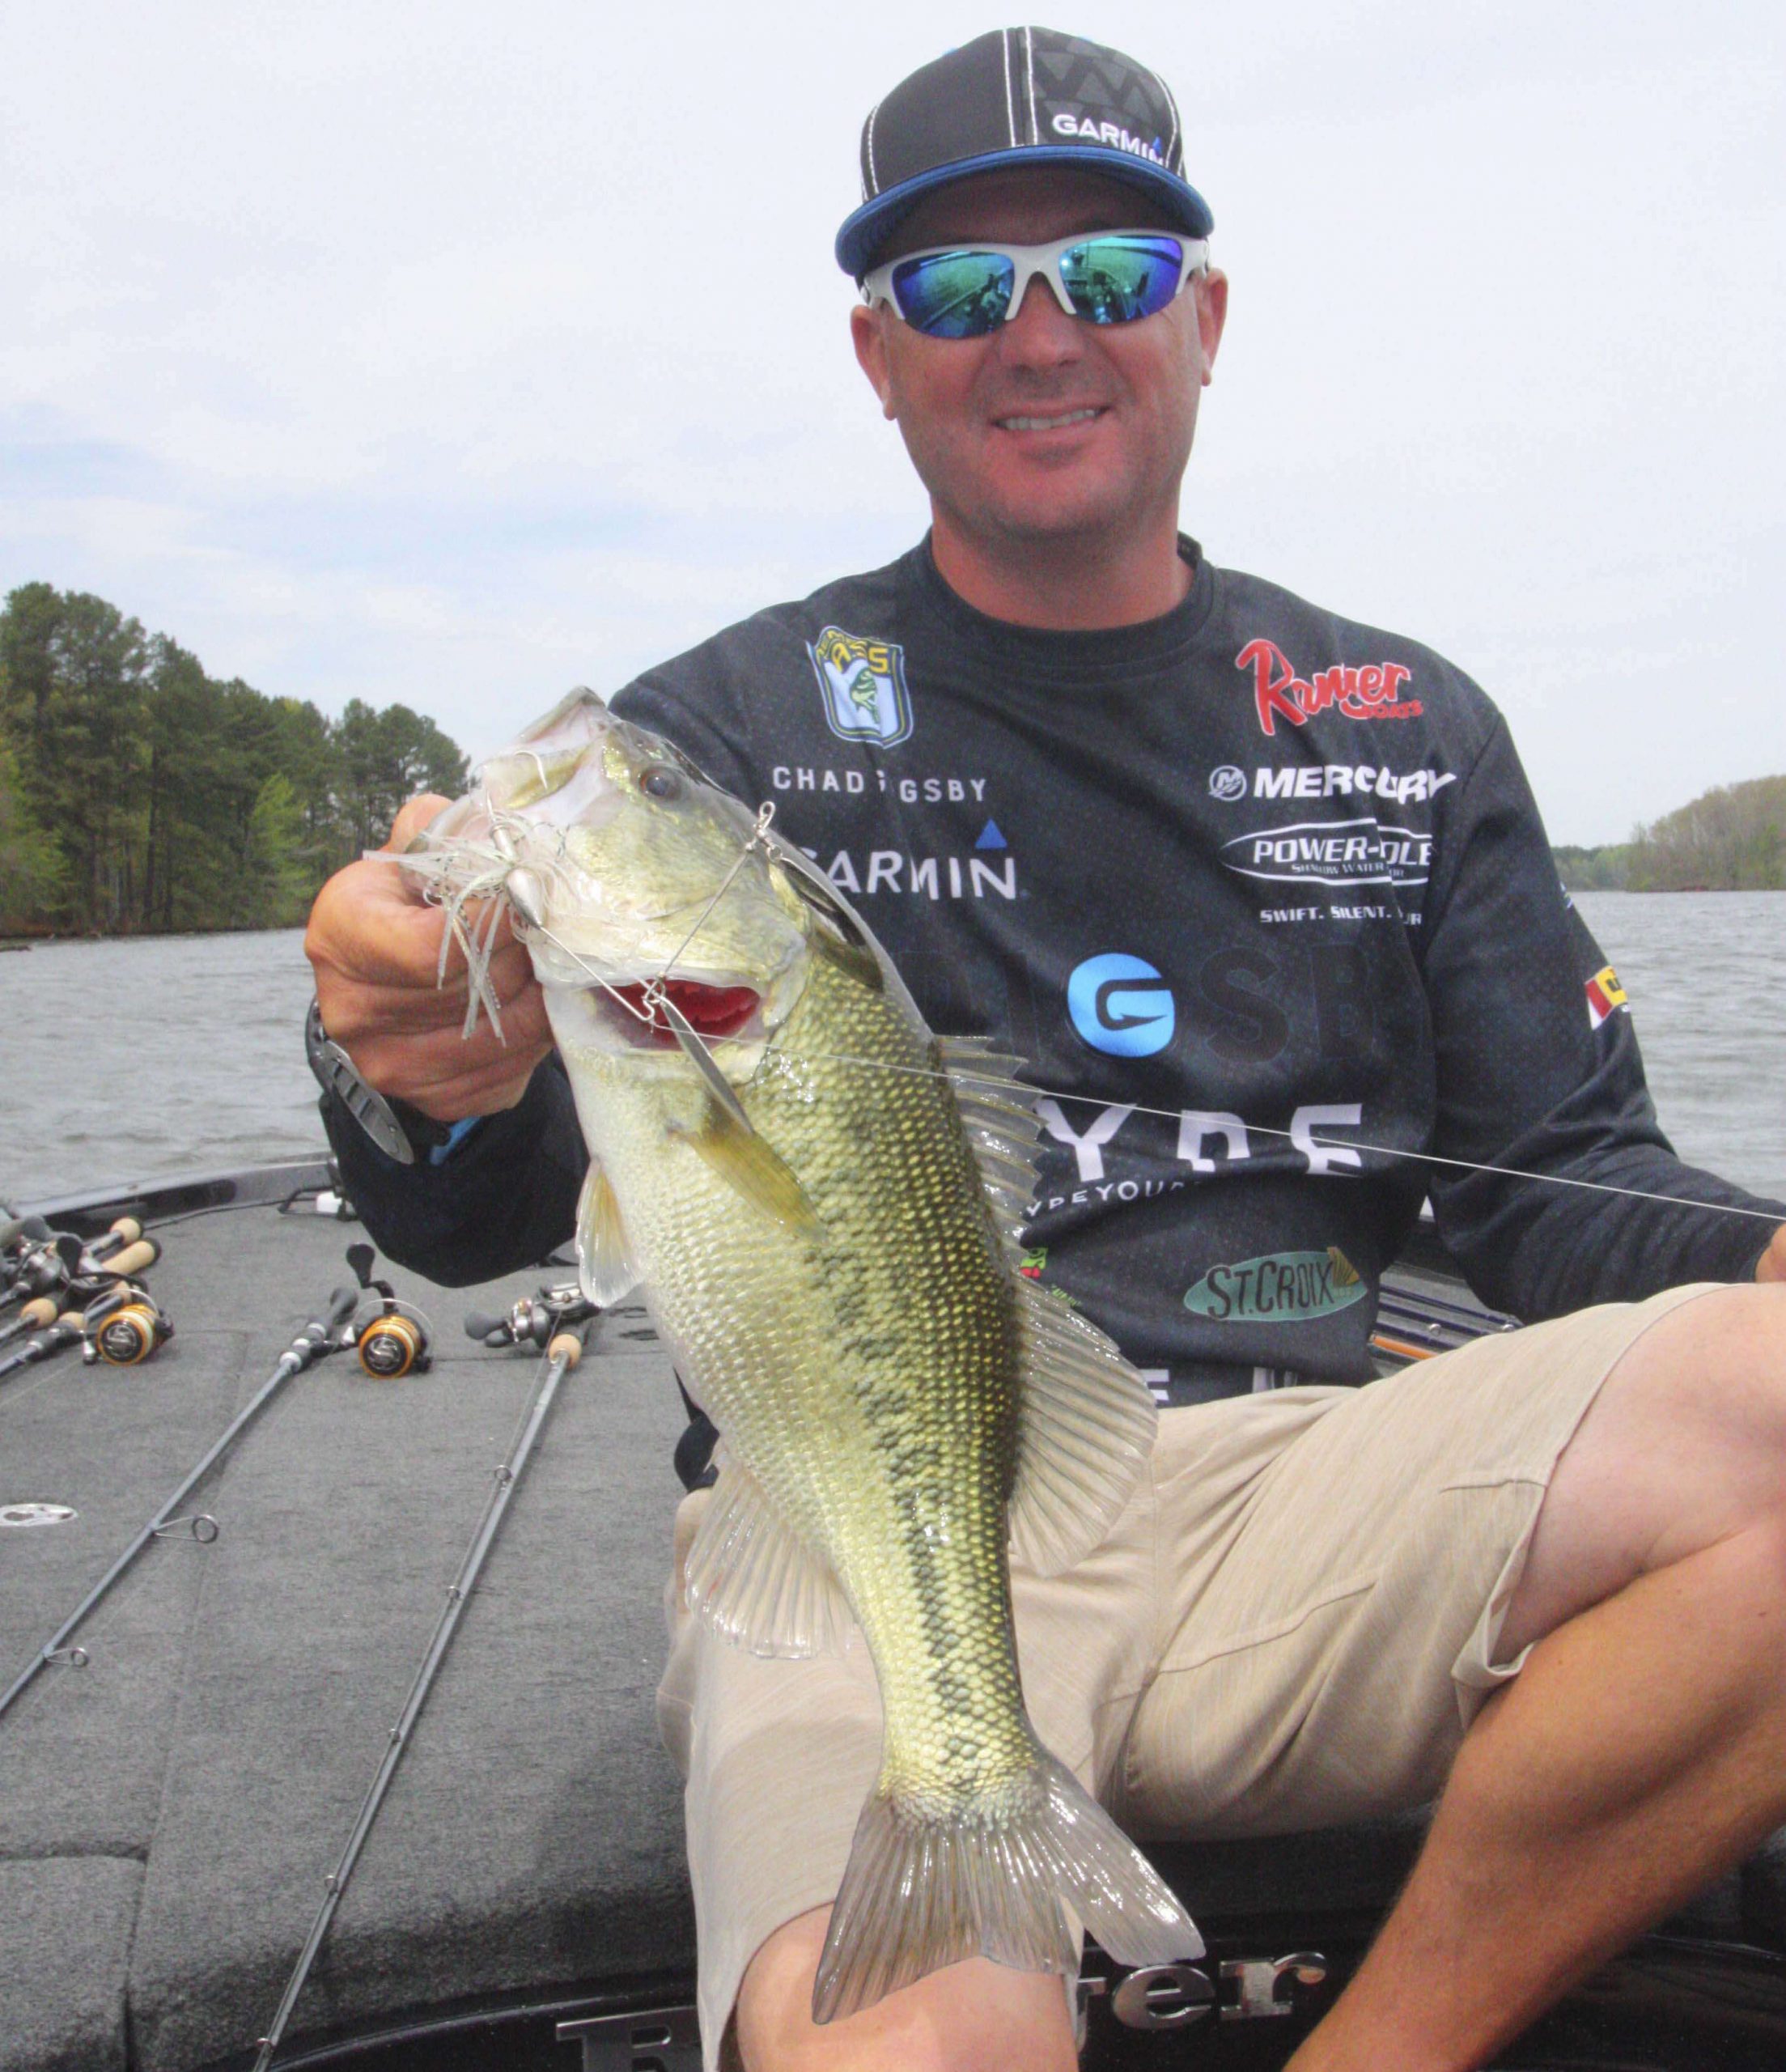 <b>1:01 p.m.</b> Grigsby catches his fifth keeper, 2 pounds, 5 ounces, off the point on the spinnerbait. <br>
<b>1:05 p.m.</b> Still pounding the point with the spinnerbait. âThereâs a ton of shad here; theyâre following the spinnerbait on every cast.â<br>
<b>1:11 p.m.</b> He hops the jig around a submerged log on the point.<br>
<b>1:20 p.m.</b> Grigsby rounds the point and continues along a channel bank with the jig and spinnerbait.<br>
<b>1:37 p.m.</b> With minutes remaining, Grigsby has run downlake to hit another windblown point with the spinnerbait.<br>
<b>1:45 p.m.</b> Grigsbyâs time is up. Heâs had a good day on Lake B, boating five keepers with a total weight of 14 pounds, 12 ounces.
<p>
<b>THE DAY IN PERSPECTIVE</b><br>
â¨âI have no complaints about my performance today,â Grigsby told Bassmaster. âI determined pretty quickly that there are very few bass spawning yet; four of my five keepers were staging on the main lake on or near wood cover. If I were to fish here tomorrow, Iâd keep hitting that main-lake wood, especially on points. But knowing that things can change very quickly this time of year, Iâd also spend some time in shallow water looking for cruising and bedding fish once the sun got high.â<br>
<p>  
<b>WHERE AND WHEN CHAD GRIGSBY CAUGHT HIS KEEPER BASS</b><br>
3 pounds, 11 ounces; 1/2-ounce black and blue Venom jig with matching Zoom Super Chunk trailer; branch on shallow point; 7:41 a.m.<br>
2 pounds, 2 ounces; same lure as No. 1; spawning bed; 9:30 a.m.<br>
3 pounds, 14 ounces; same lure as No. 1; submerged log on clay point; 9:45 a.m.<br>
2 pounds, 12 ounces; 1/2-ounce white Venom spinnerbait; main-lake bank; 9:53 a.m.<br>
2 pounds, 5 ounces; same lure as No. 4; main-lake point; 1:01 p.m.<br>
TOTAL: 14 POUNDS, 12 OUNCES